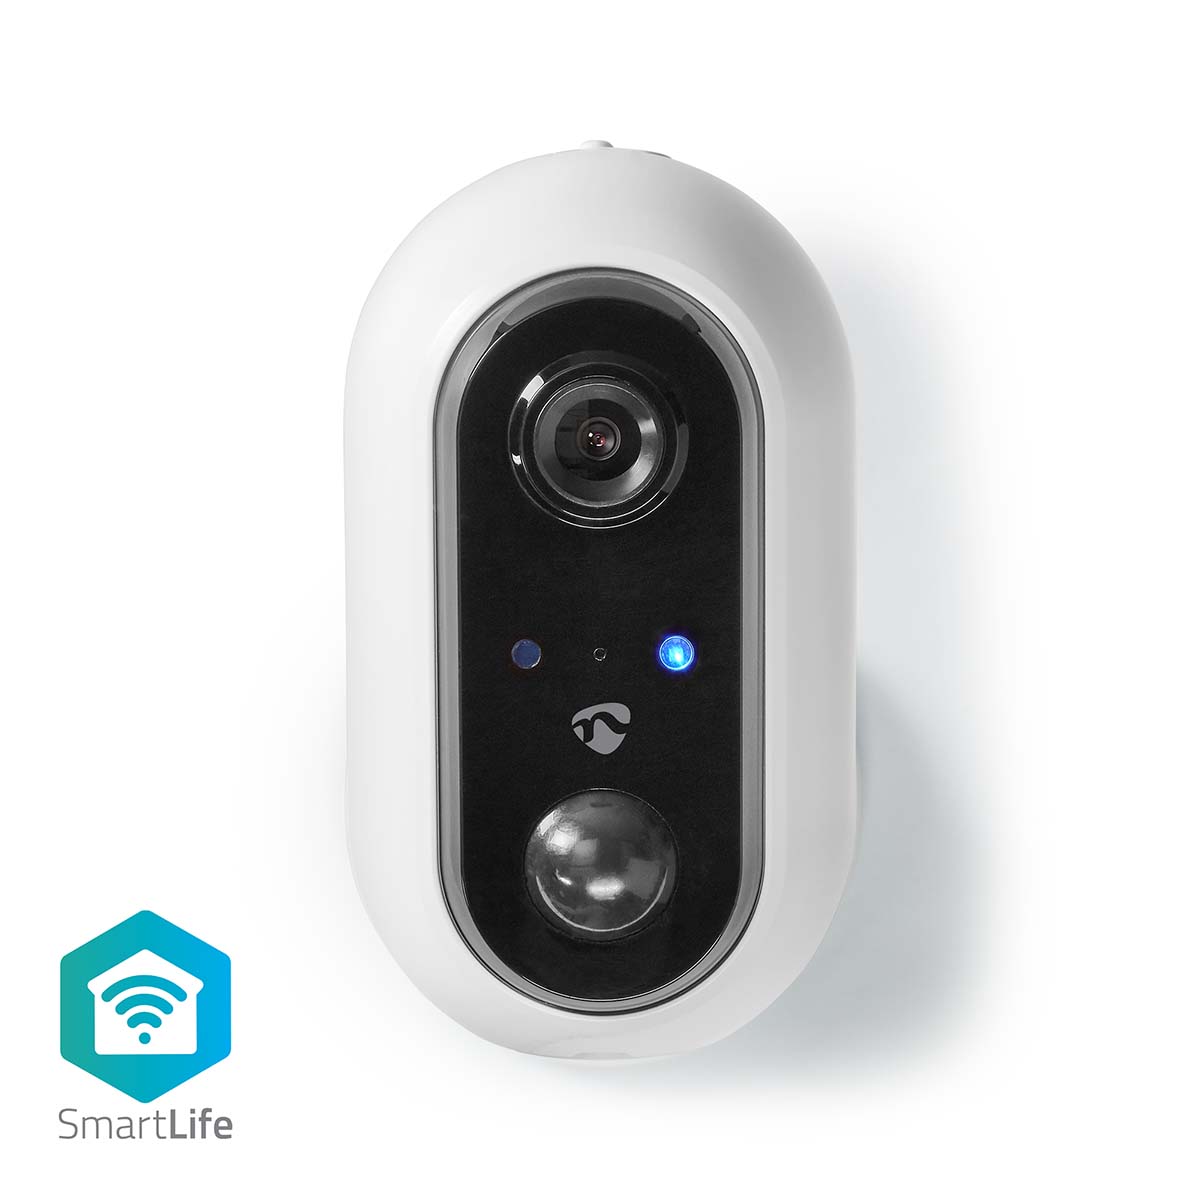 SmartLife Outdoor Camera, 4G, Full HD 1080p, Pan tilt, IP65, Cloud  Storage (optional) / microSD (not included), 5 V DC, With motion sensor, Night vision